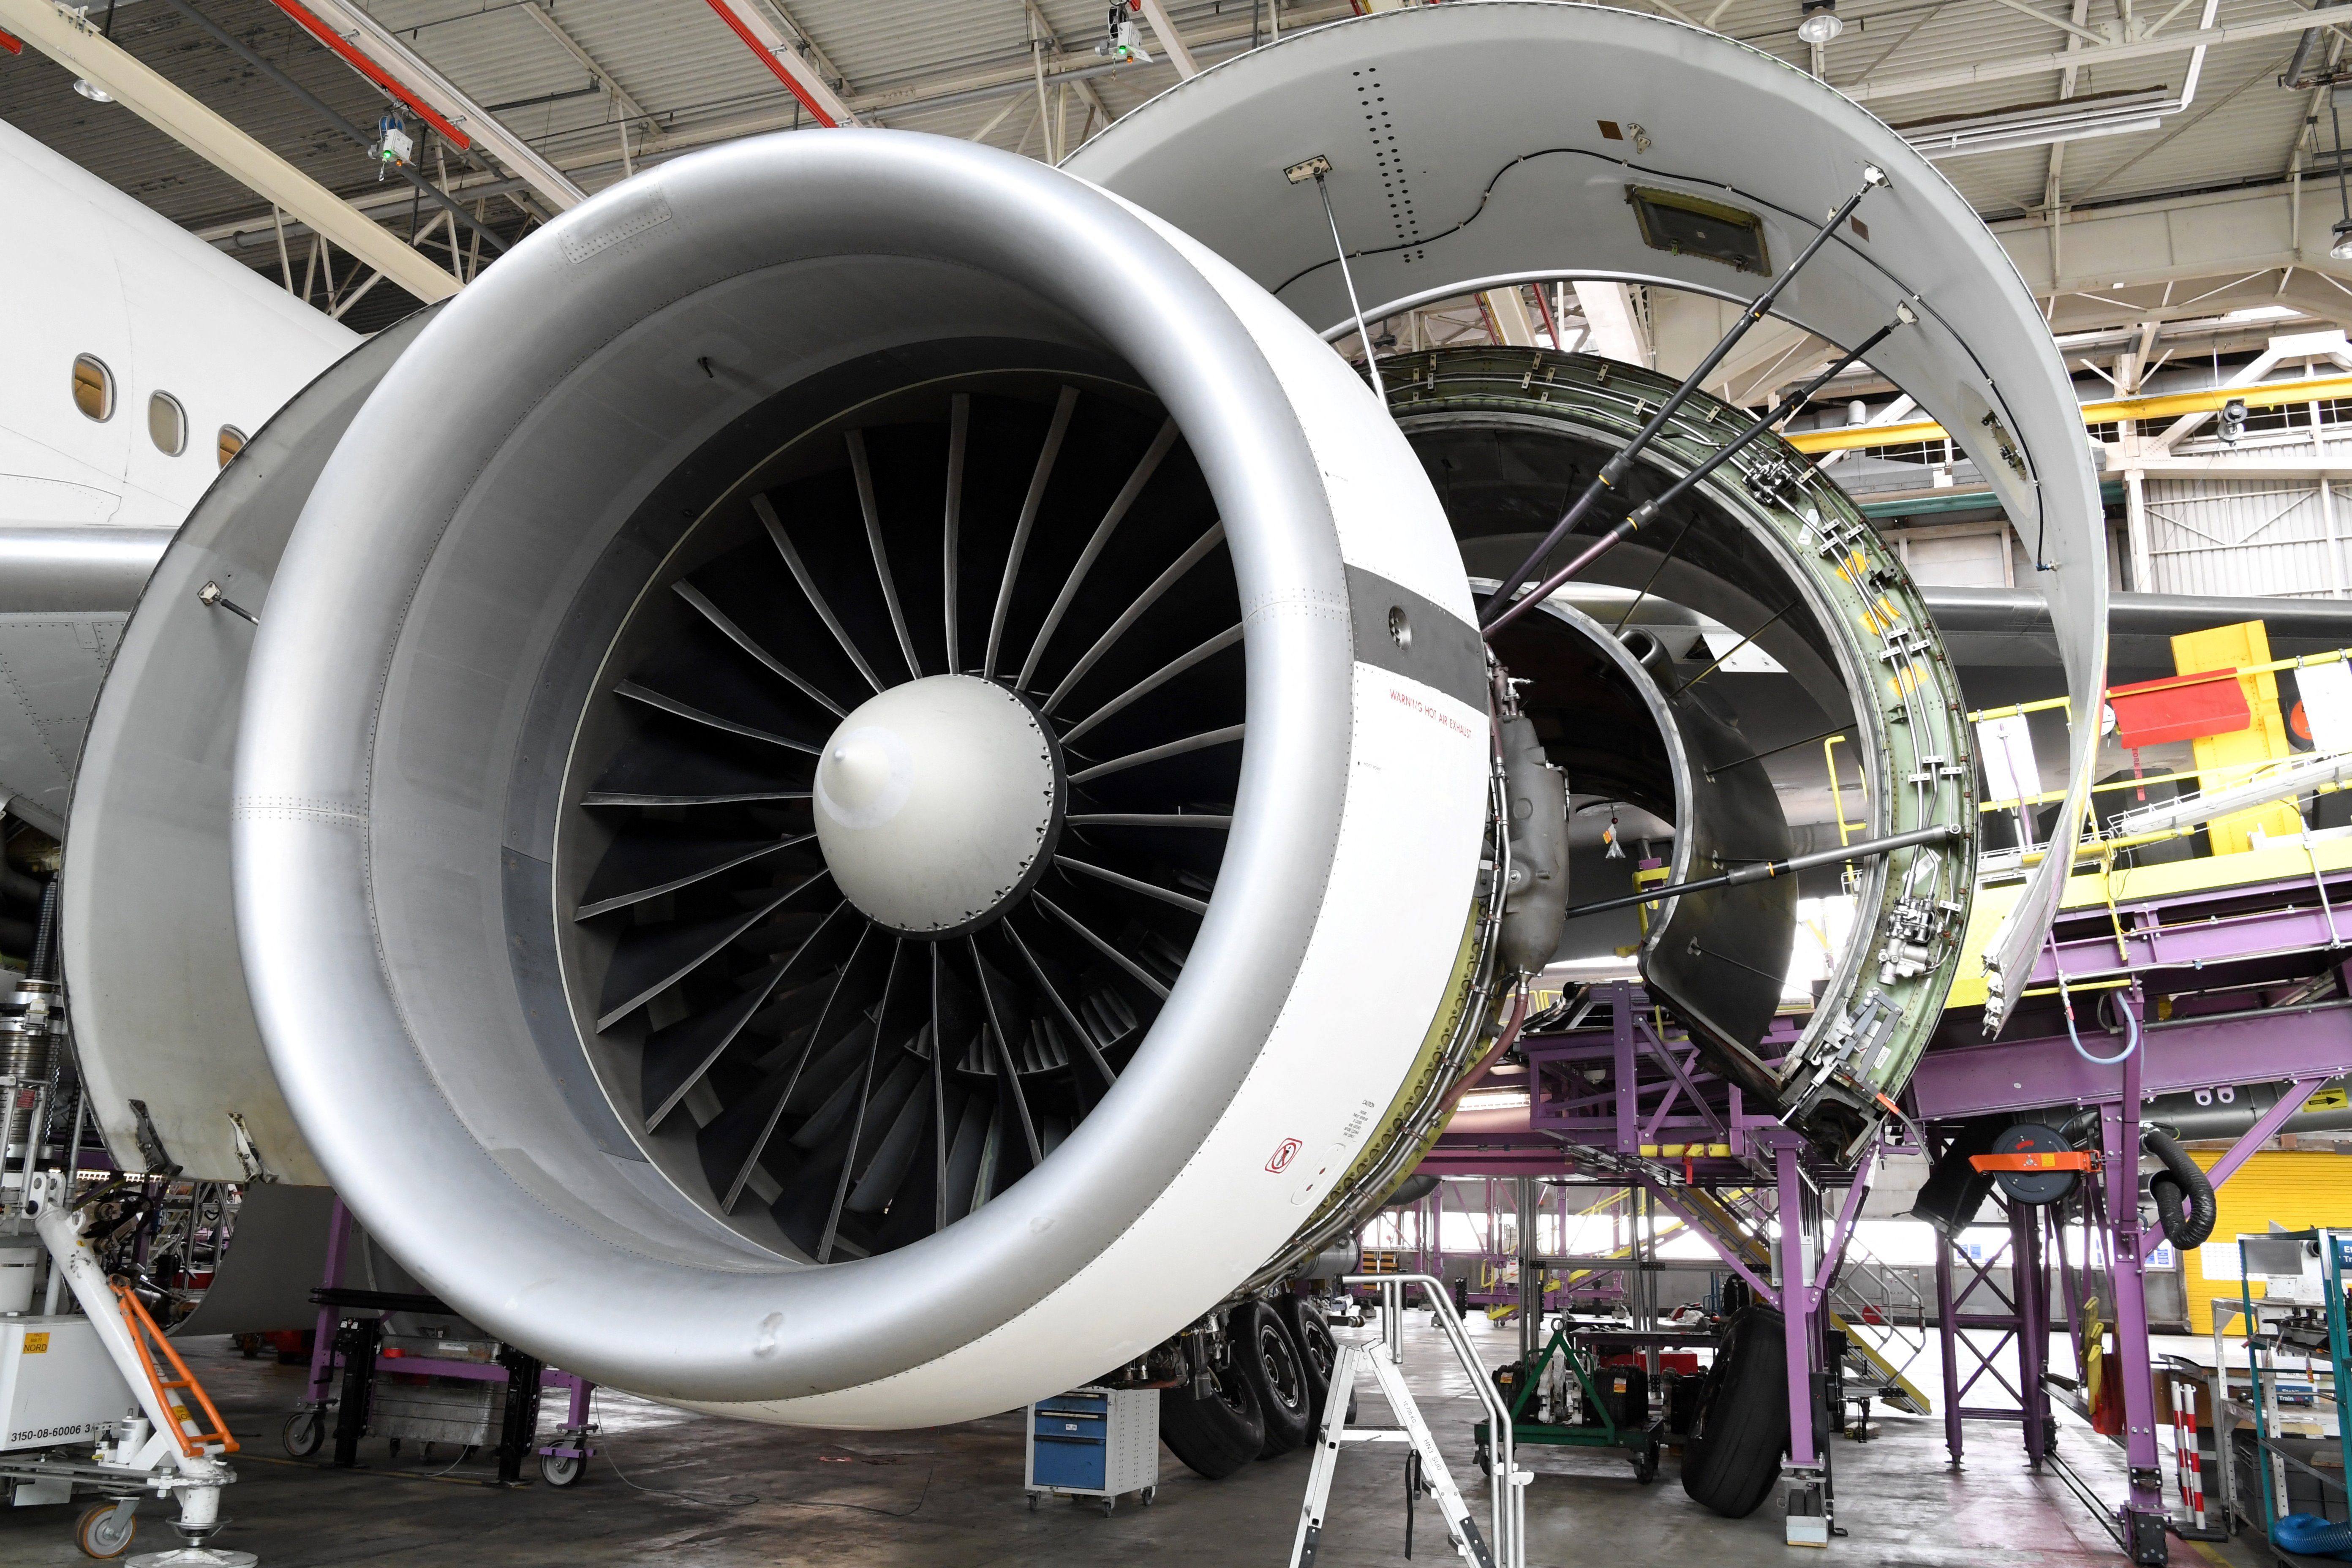 An Air France Boeing 777-300 ER power plant during heavy maintenance